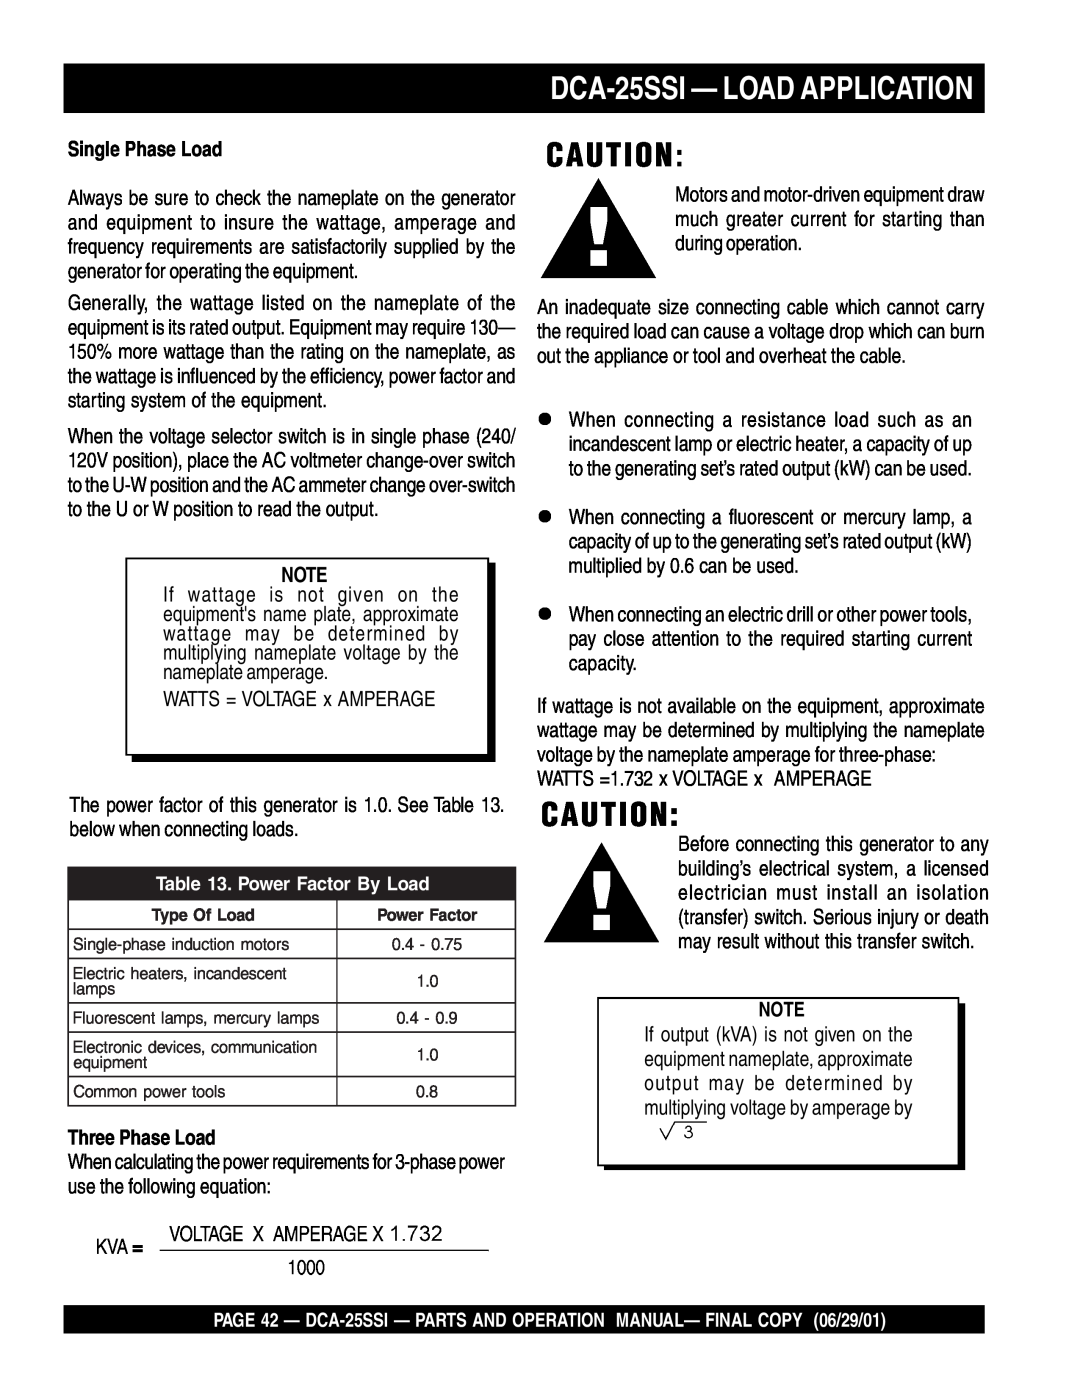 Multiquip operation manual DCA-25SSI— LOAD APPLICATION, Single Phase Load, Three Phase Load 